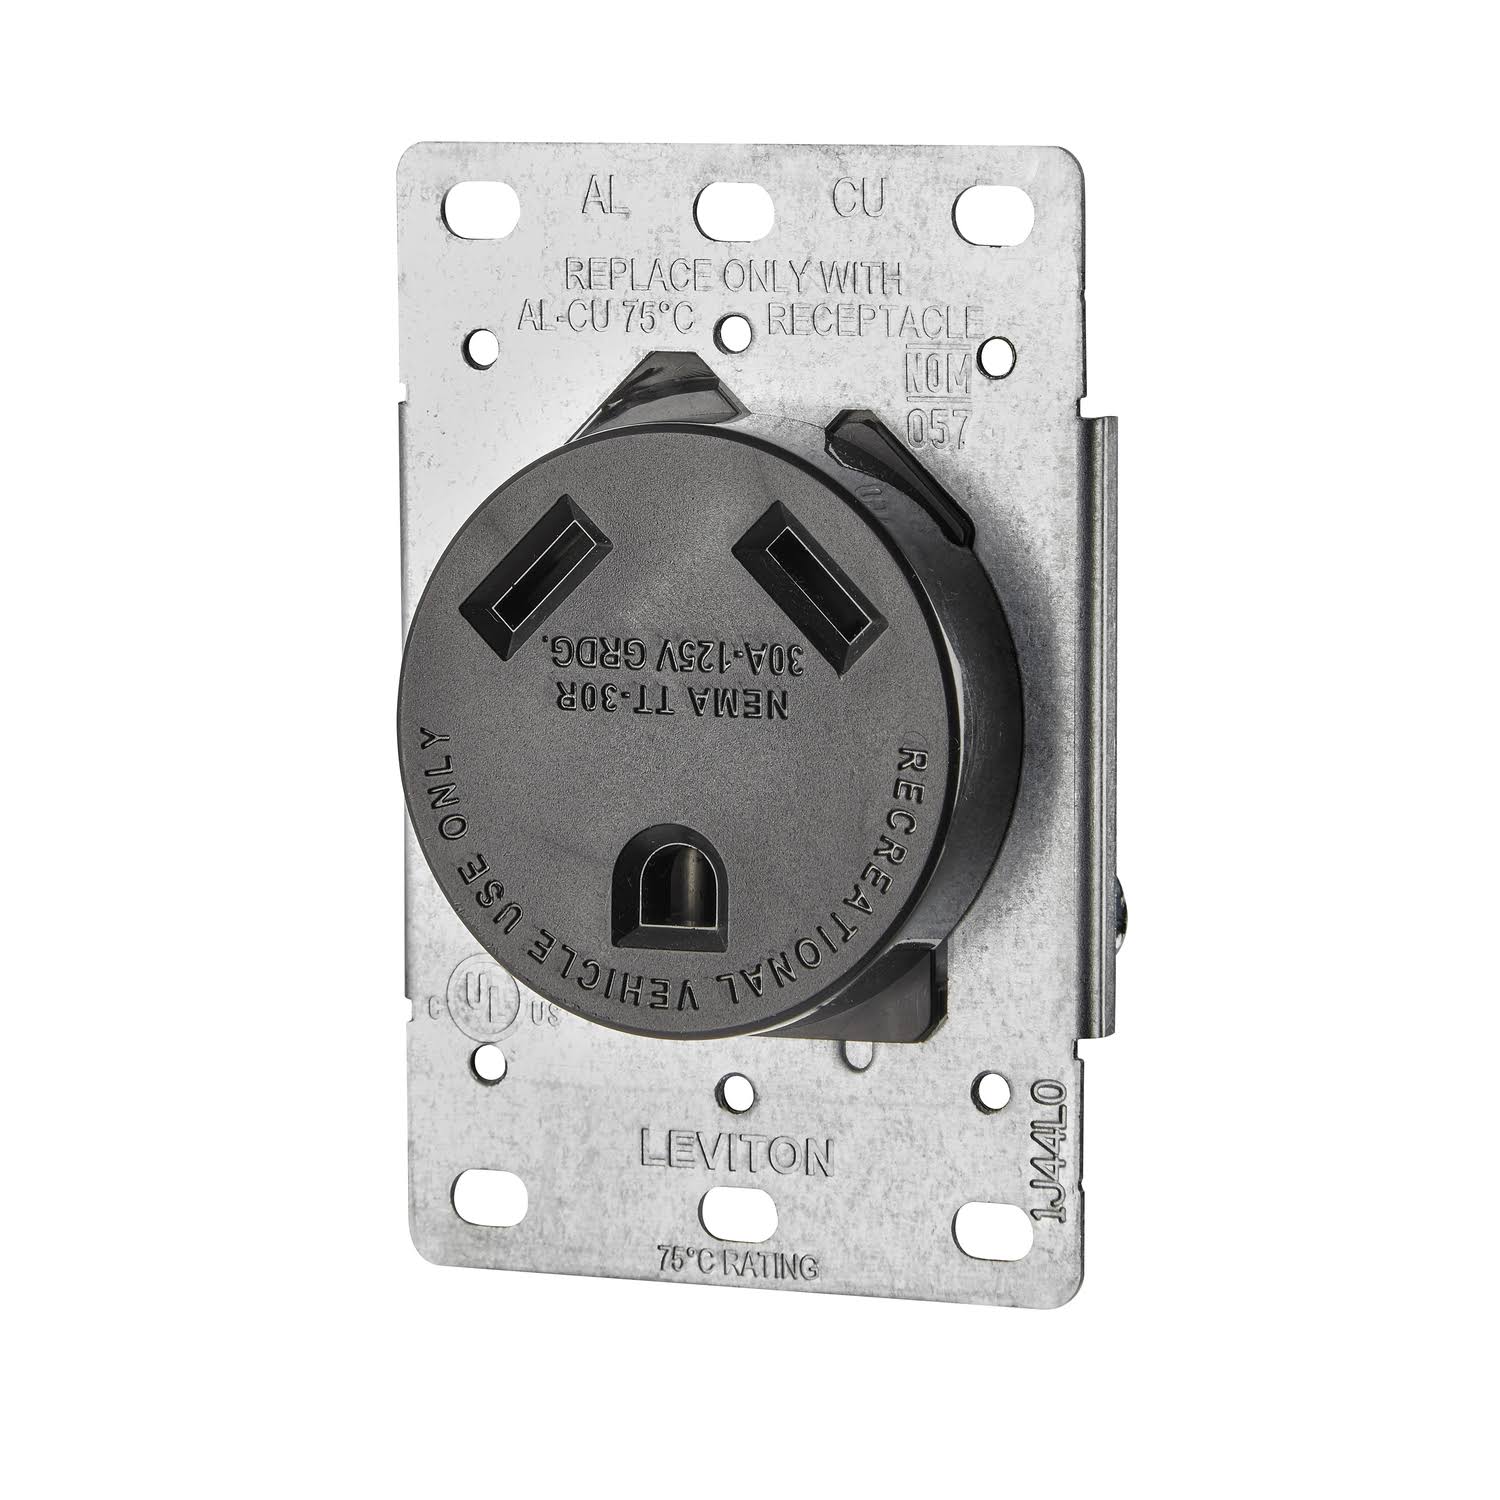 Leviton Electrical Receptacle